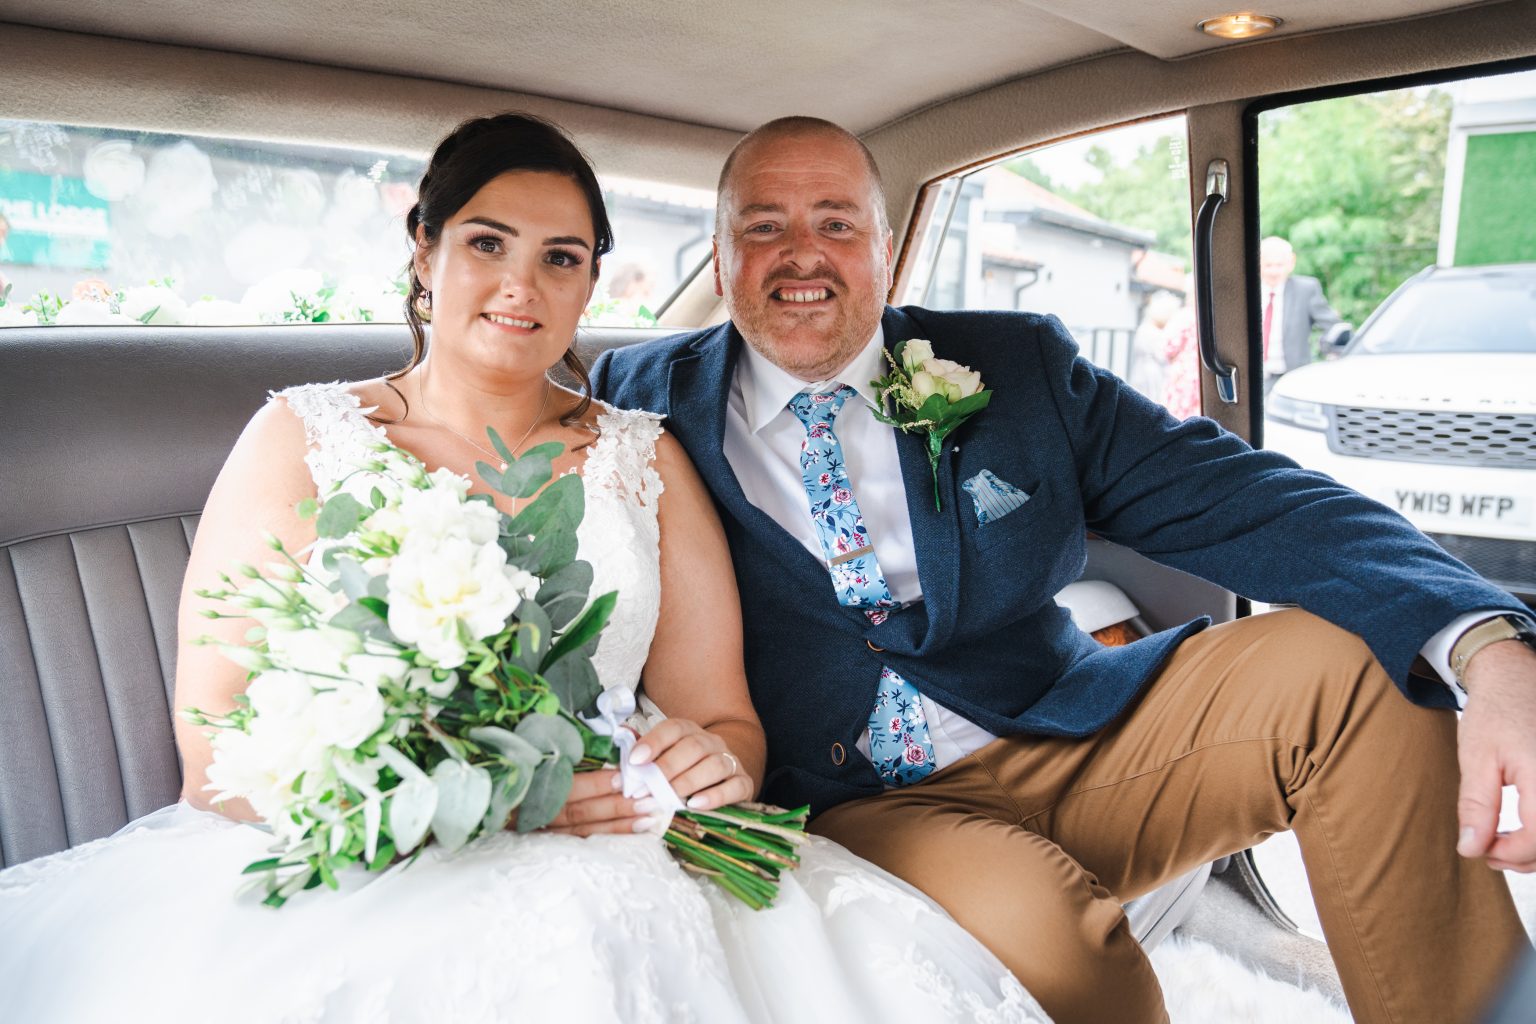 hull wedding photographer captures a bride and groom in their wedding car